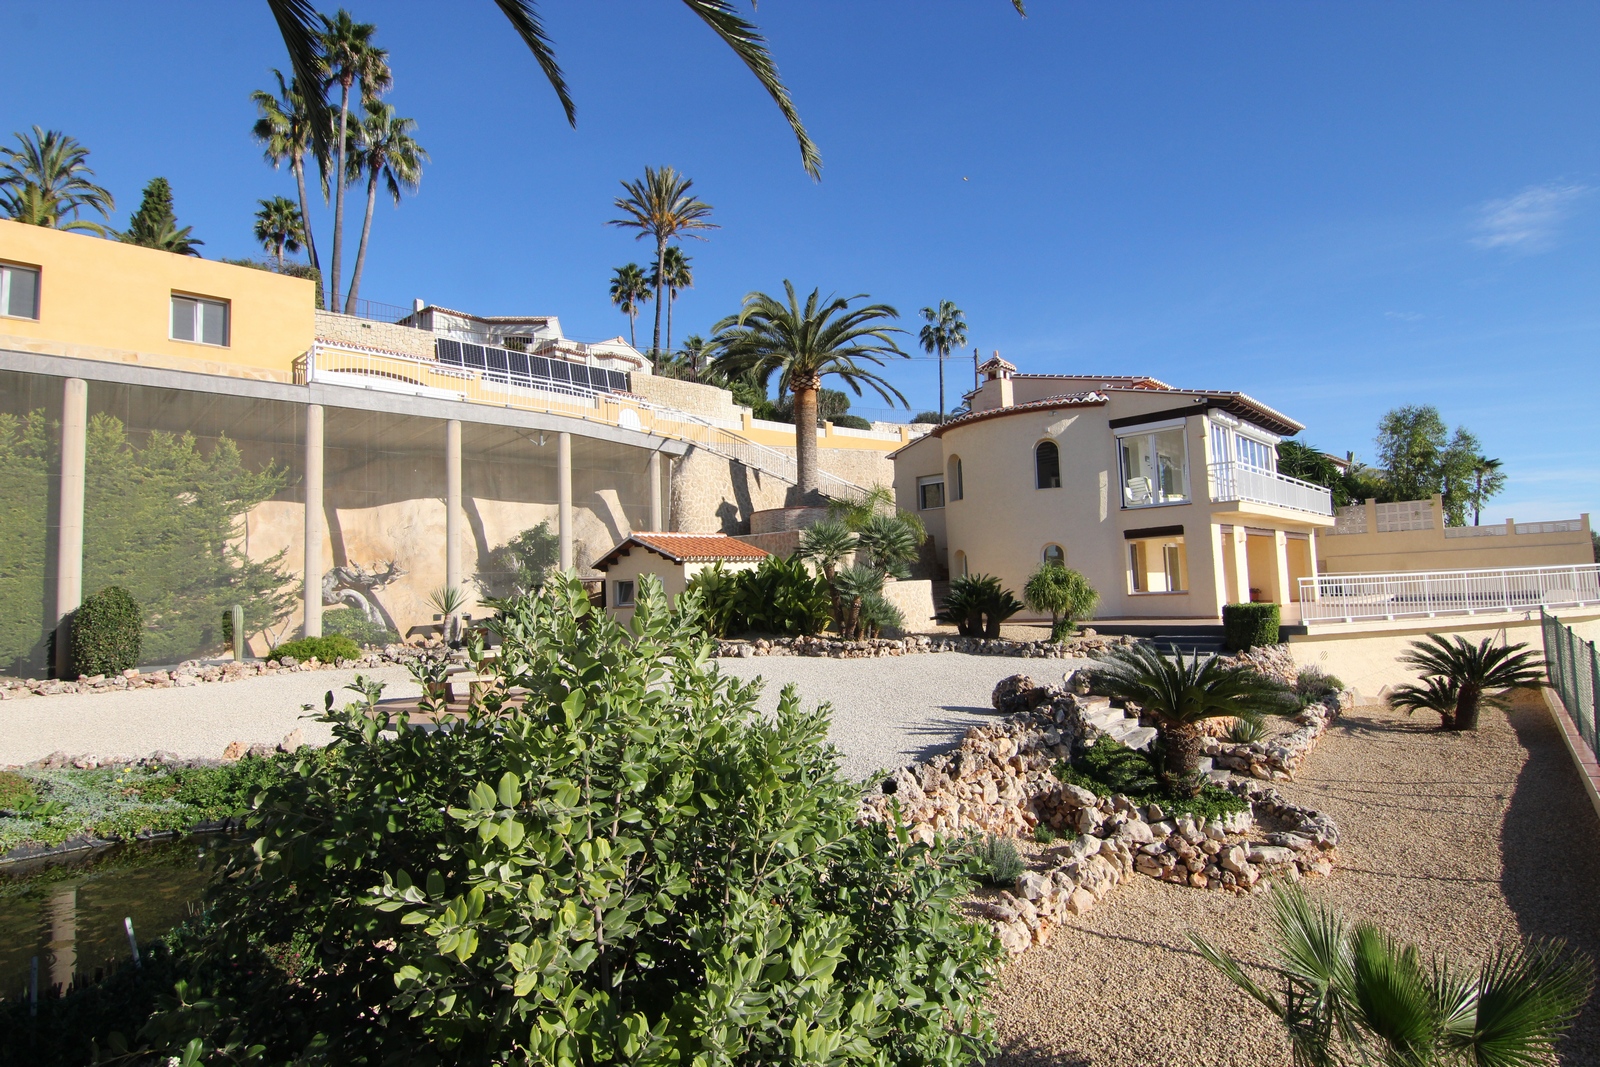 Villa for sale with stunning views, two plots and swimming pool.